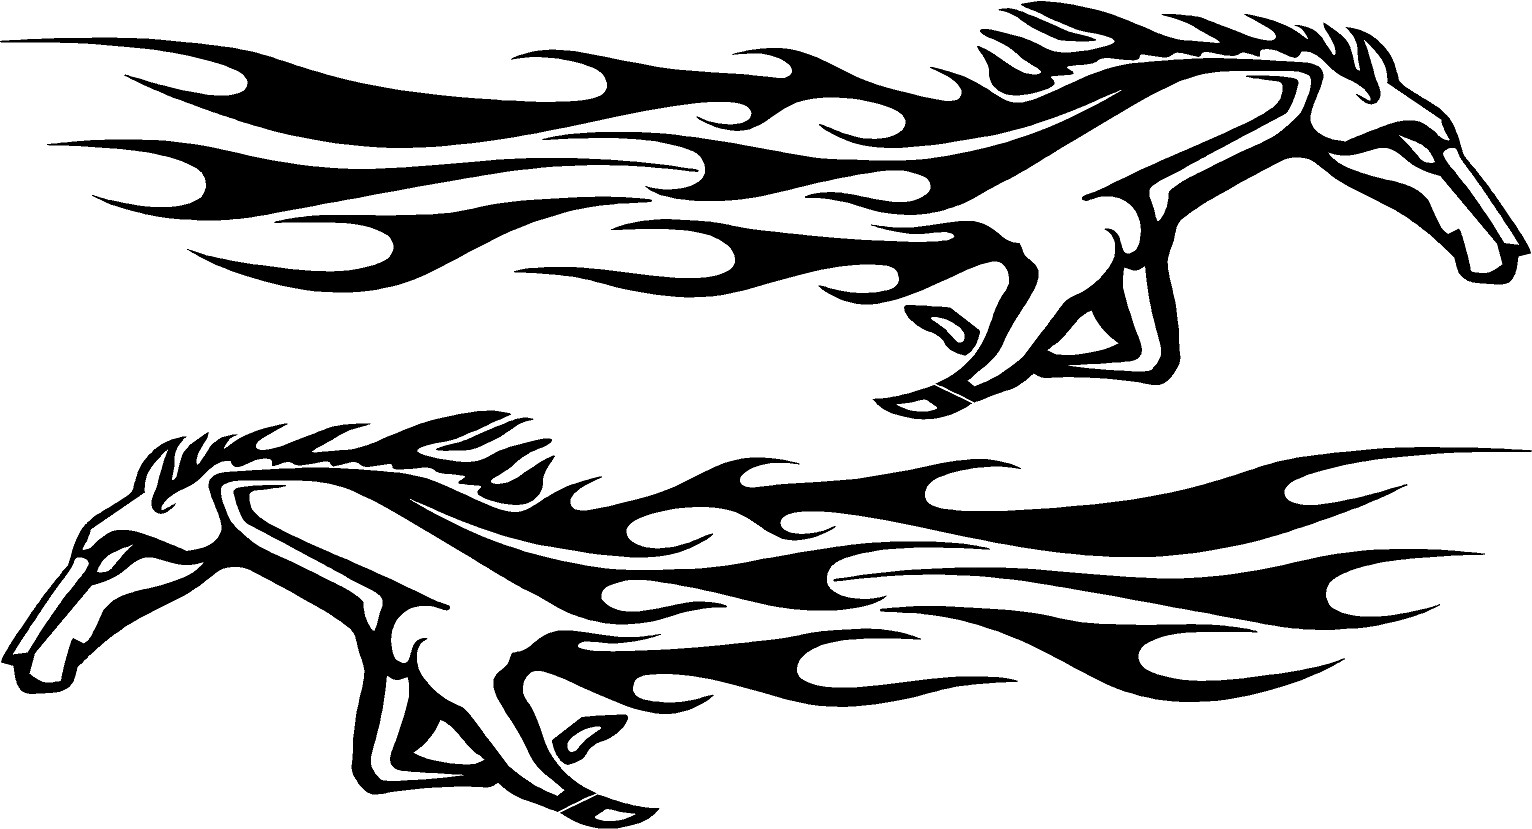 car decals, mustang horse flames decals, automotive flame graphics ...